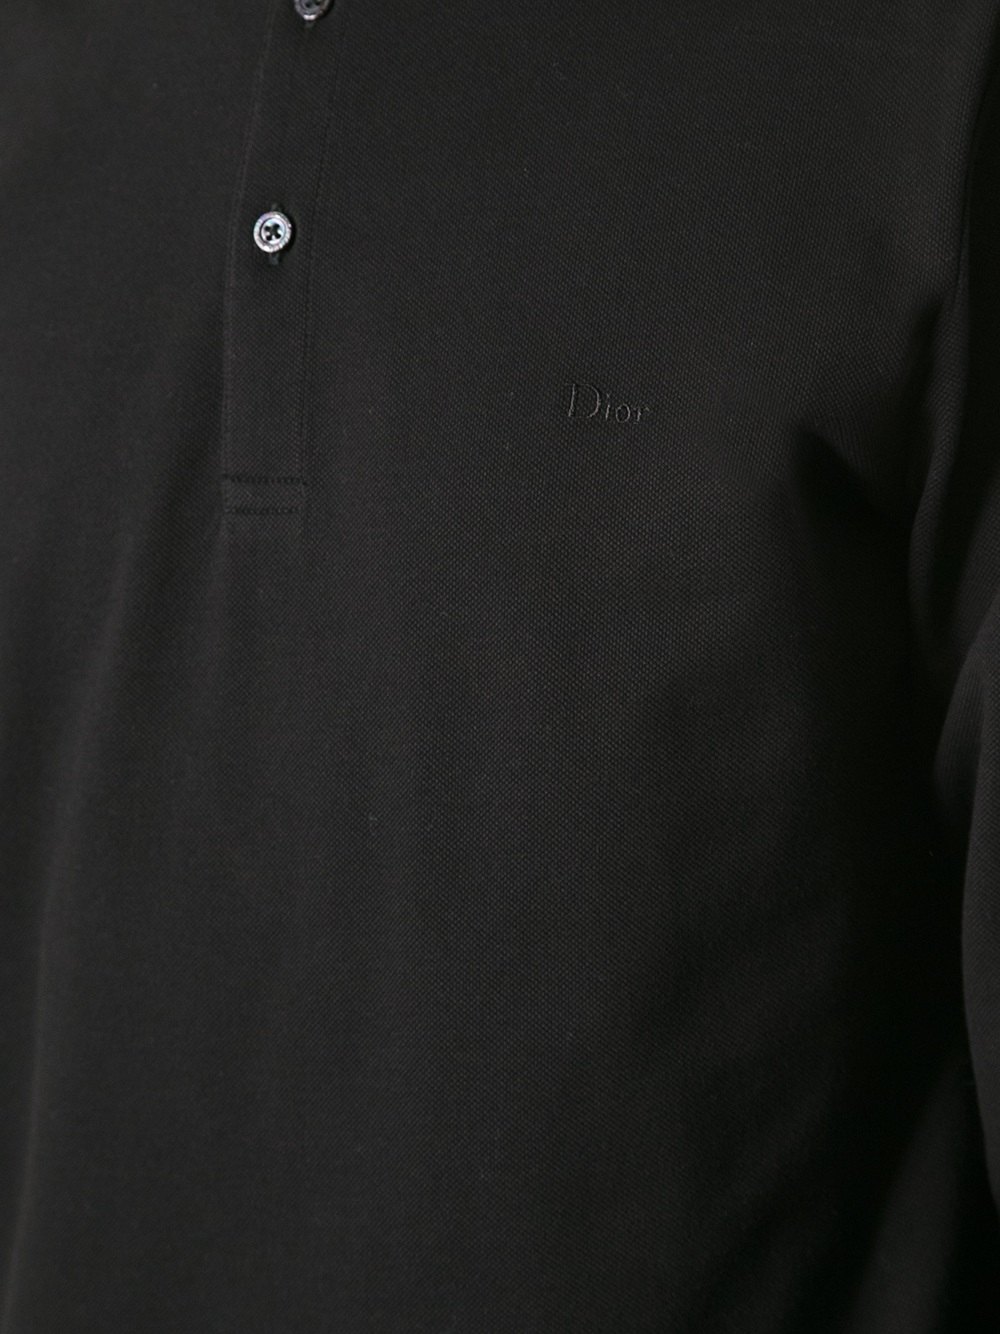 Dior Dior Long Sleeve Polo Shirt in Black for Men - Lyst